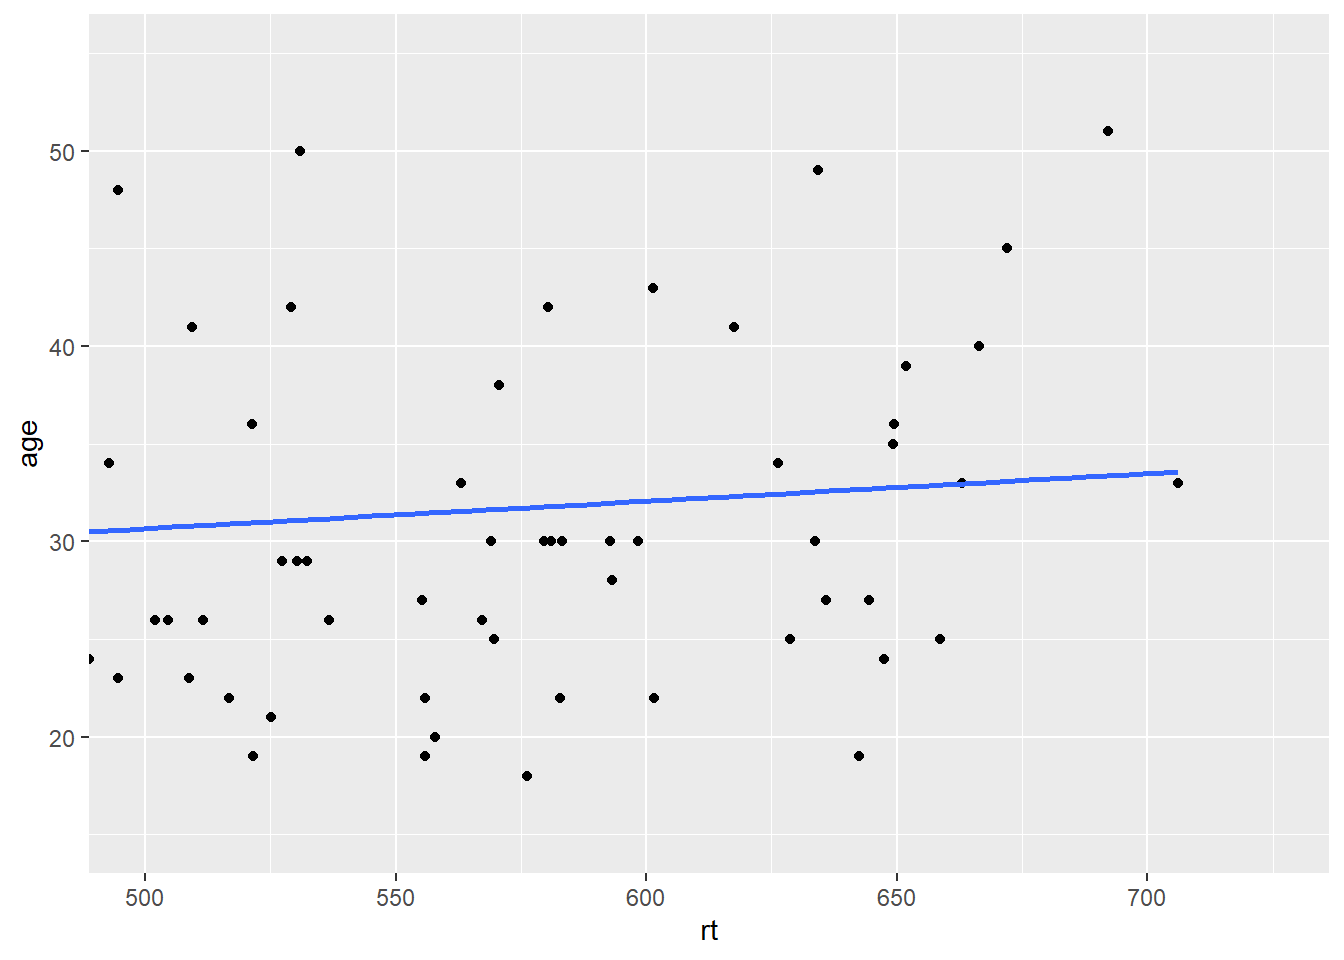 Zoomed in on scatterplot with small expansion around set limits